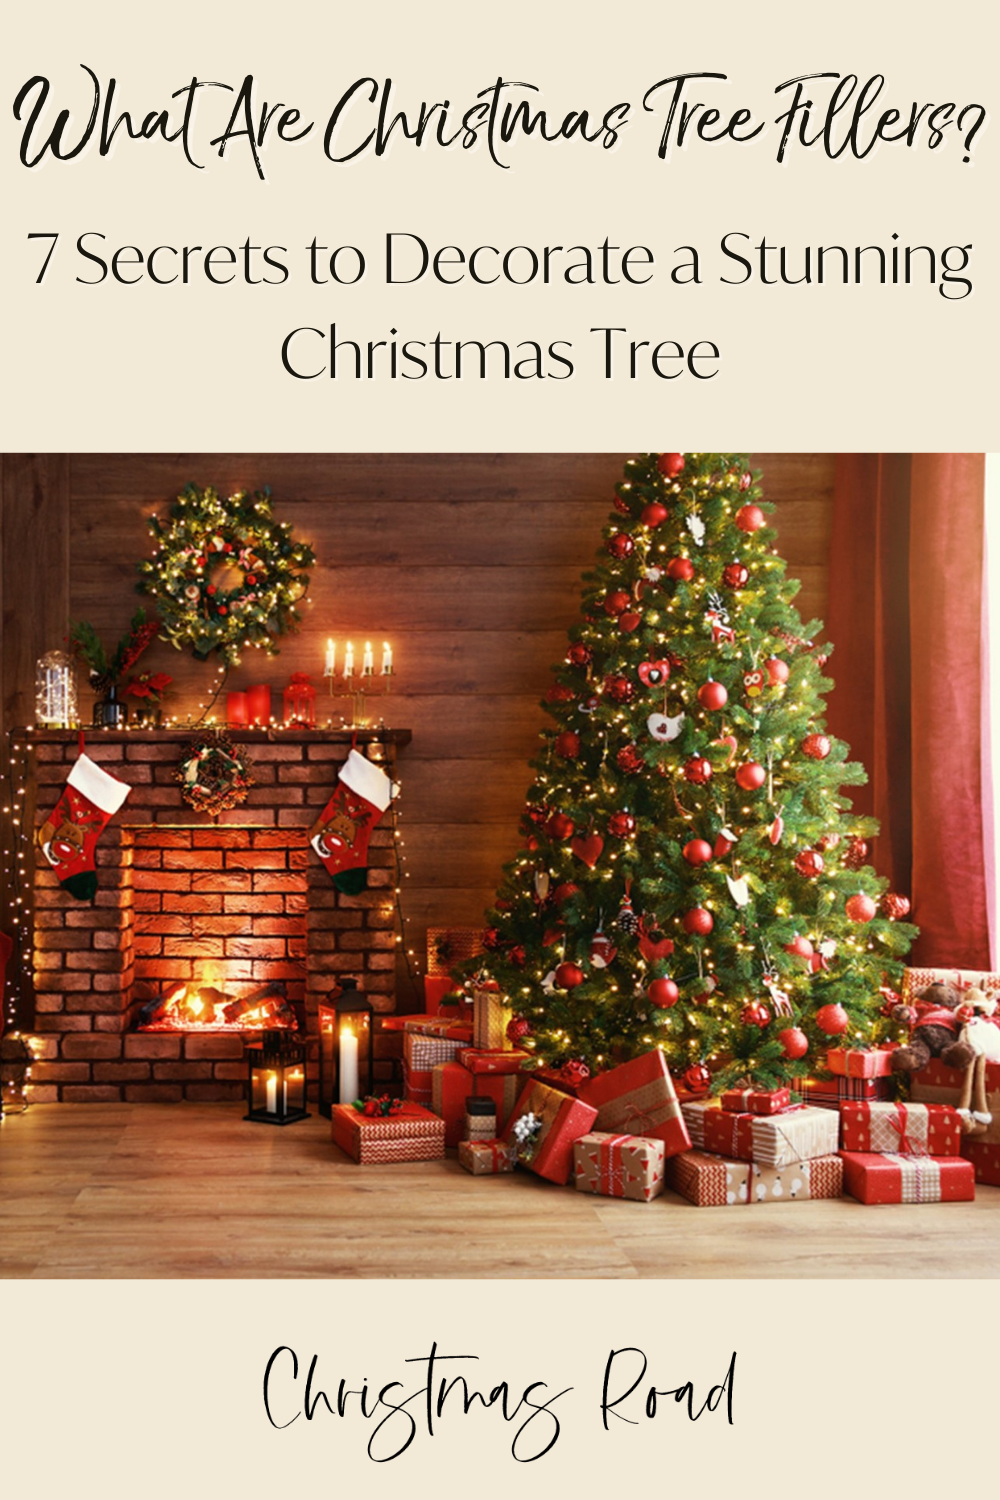 What Are Christmas Tree Fillers? 7 Secrets to Decorate a Stunning Christmas Tree